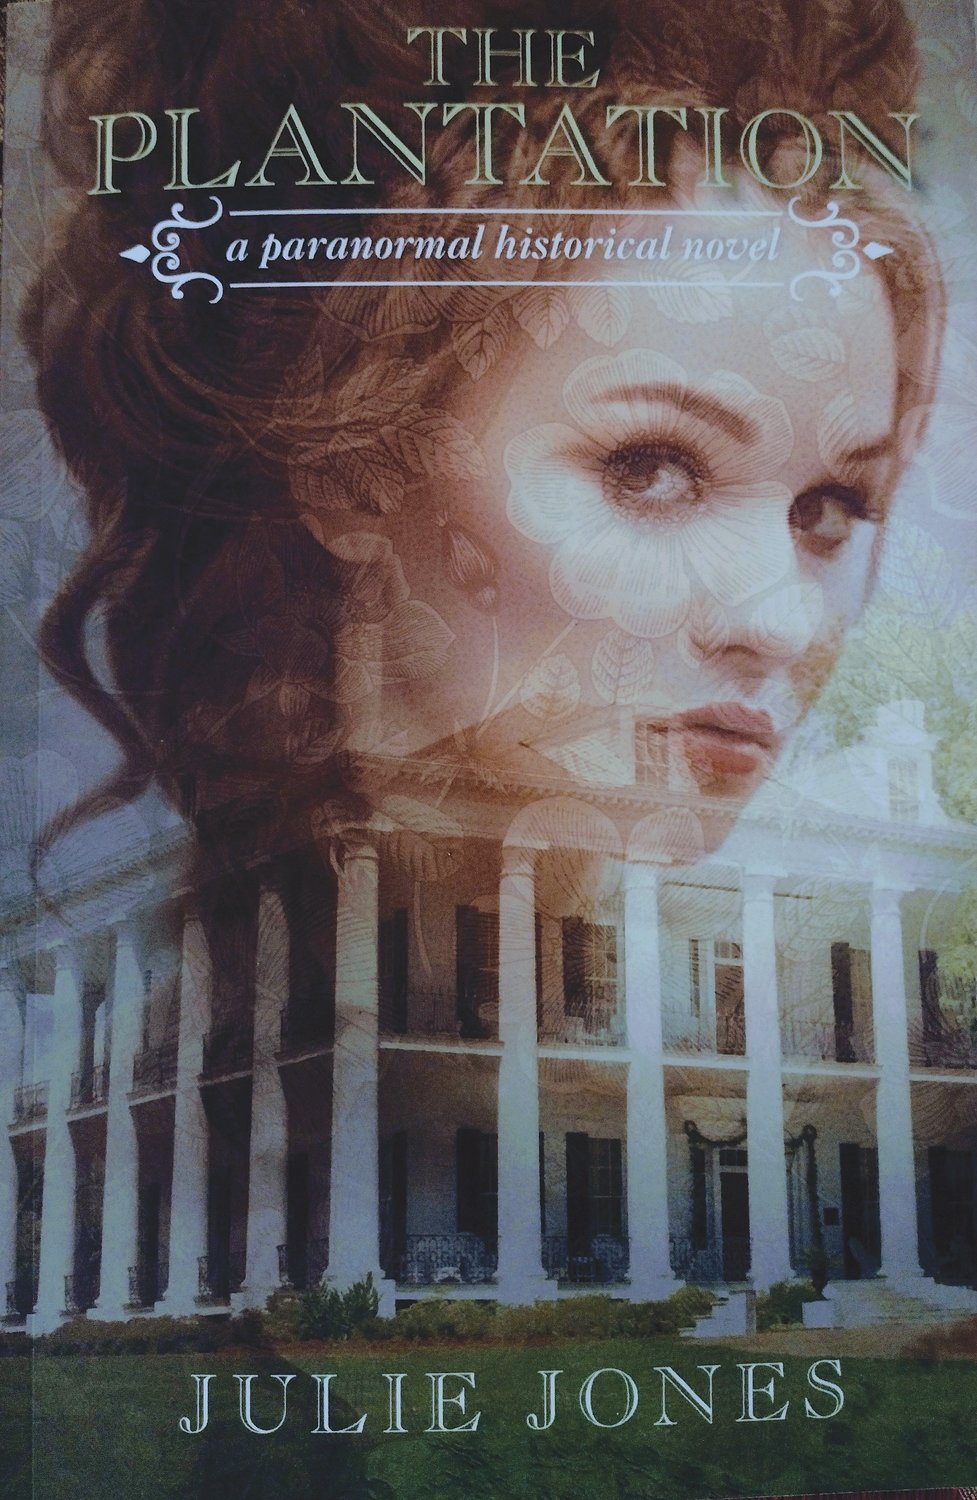 Julie Jones is the author of the paranormal historical novel, “The Plantation,” a ghostly tale of voodoo and mayhem set in a factual account of the American Civil War.